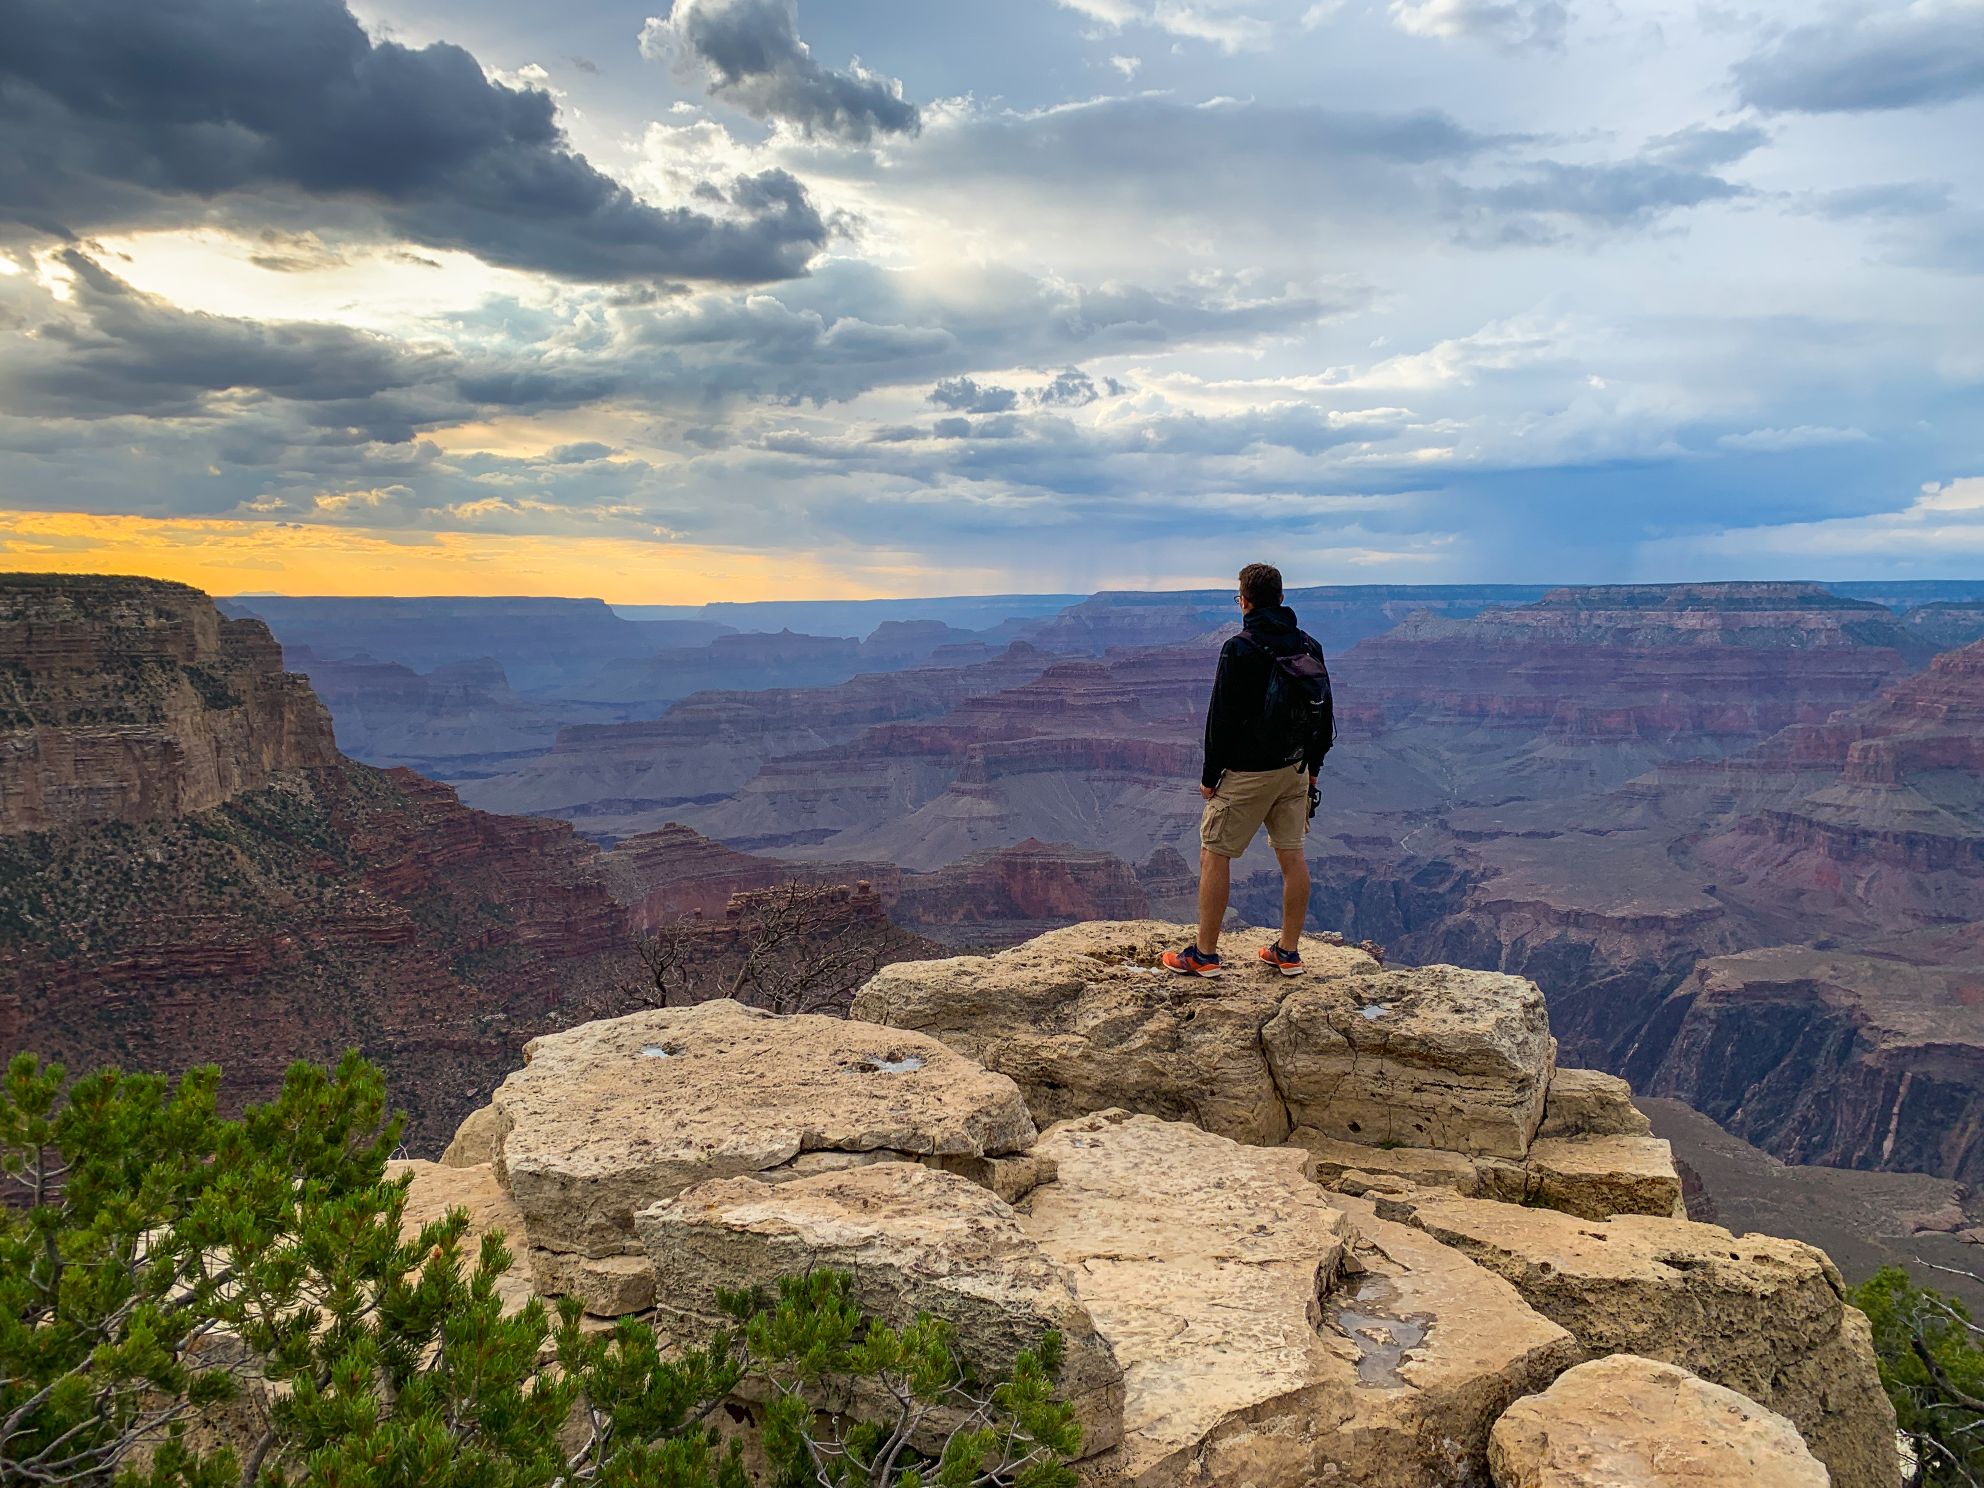 4-Day Grand Canyon Backcountry Hiking Tour from Las Vegas to Phantom Ranch